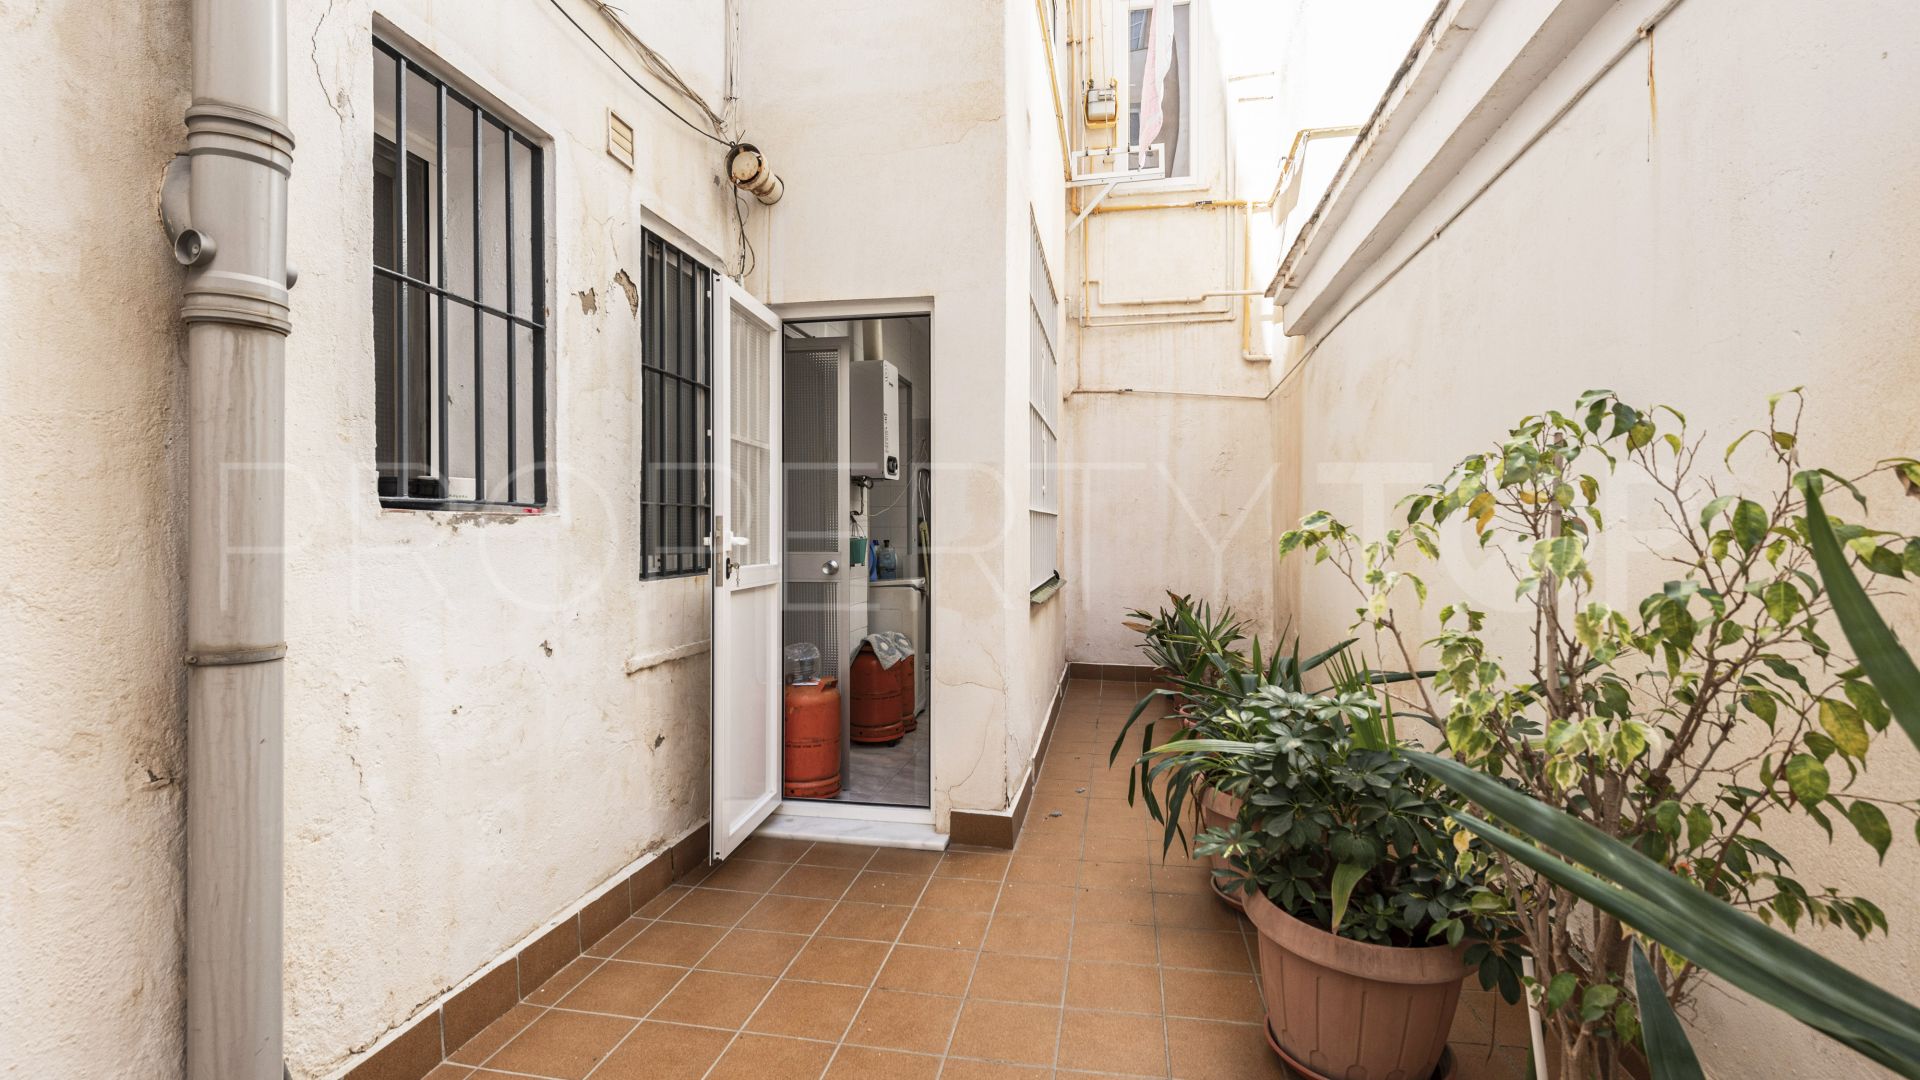 For sale 4 bedrooms ground floor apartment in Malaga